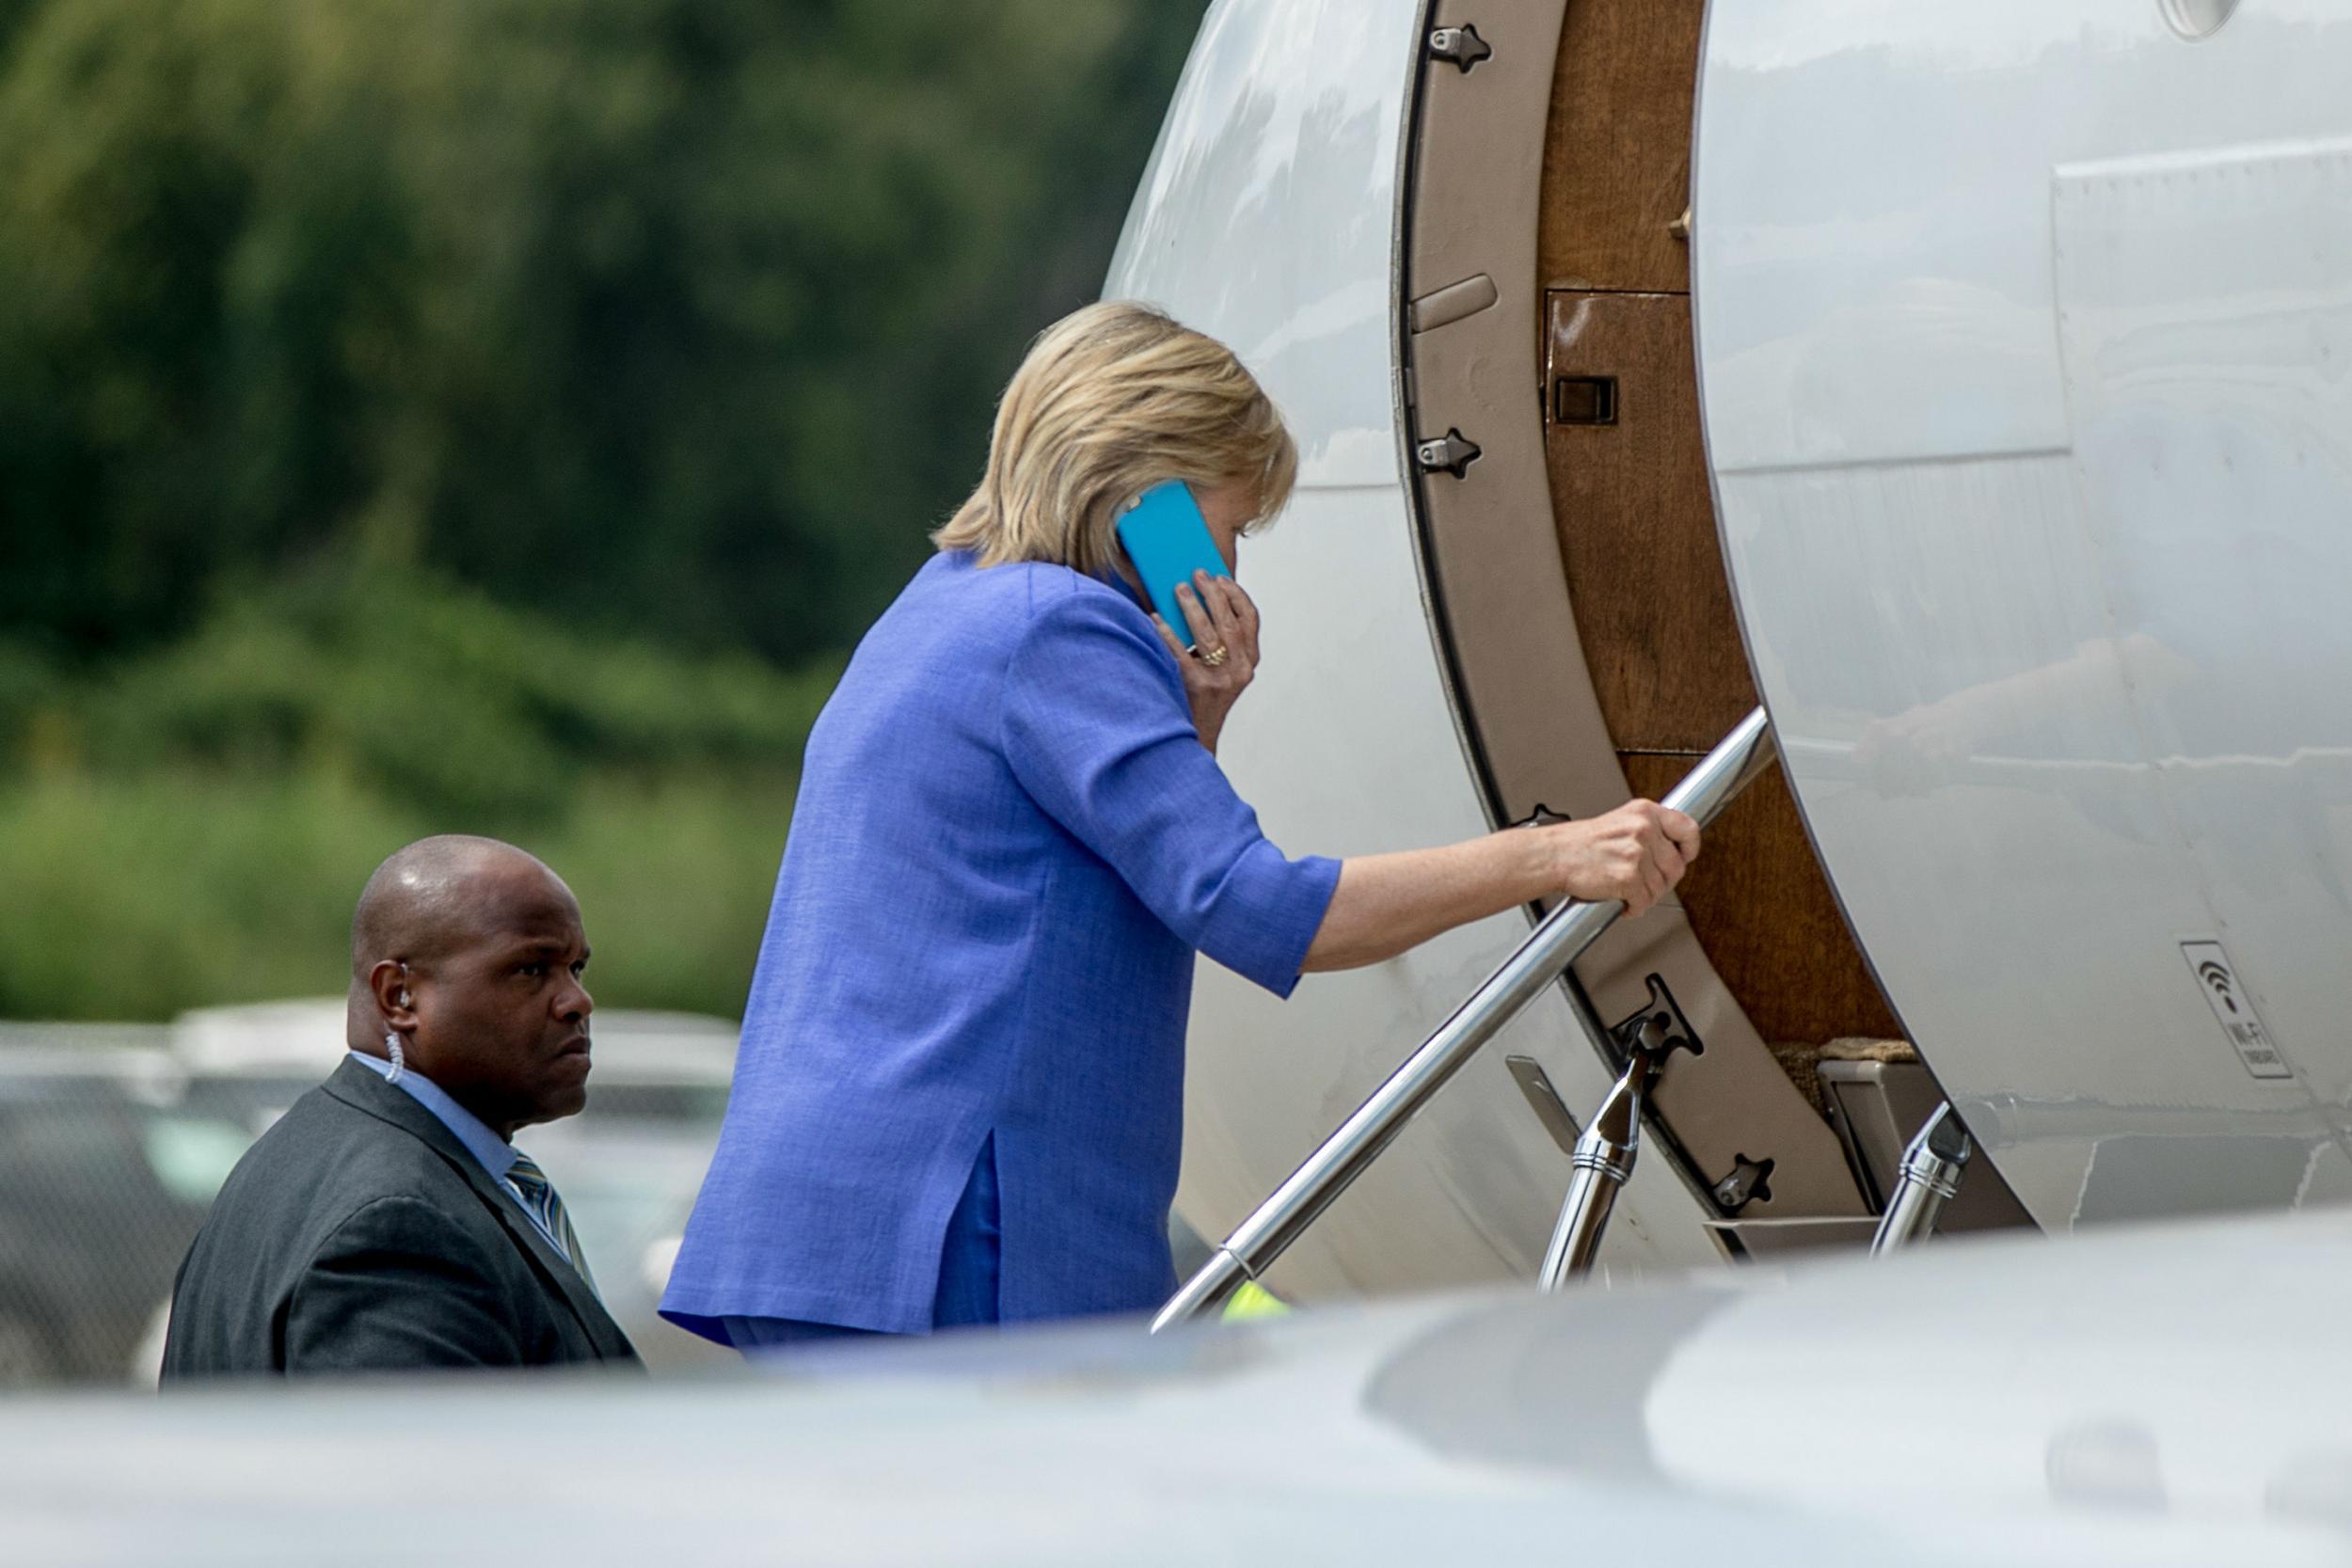 Hillary Clinton on the campaign trail in Ohio where she is expecting an easy win